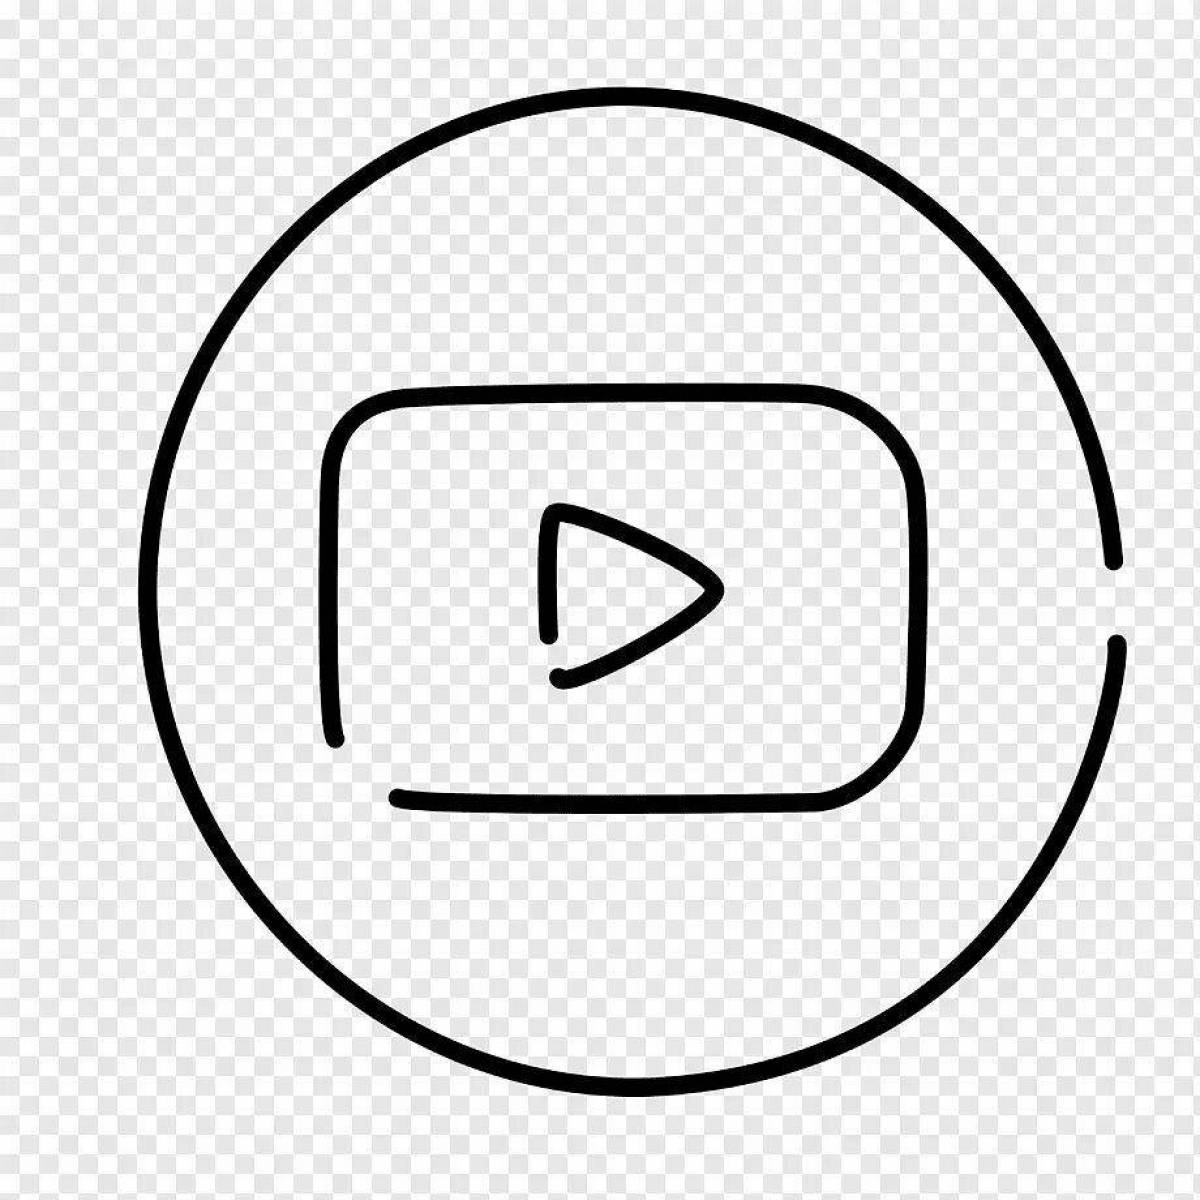 Coloring page with fun youtube logo